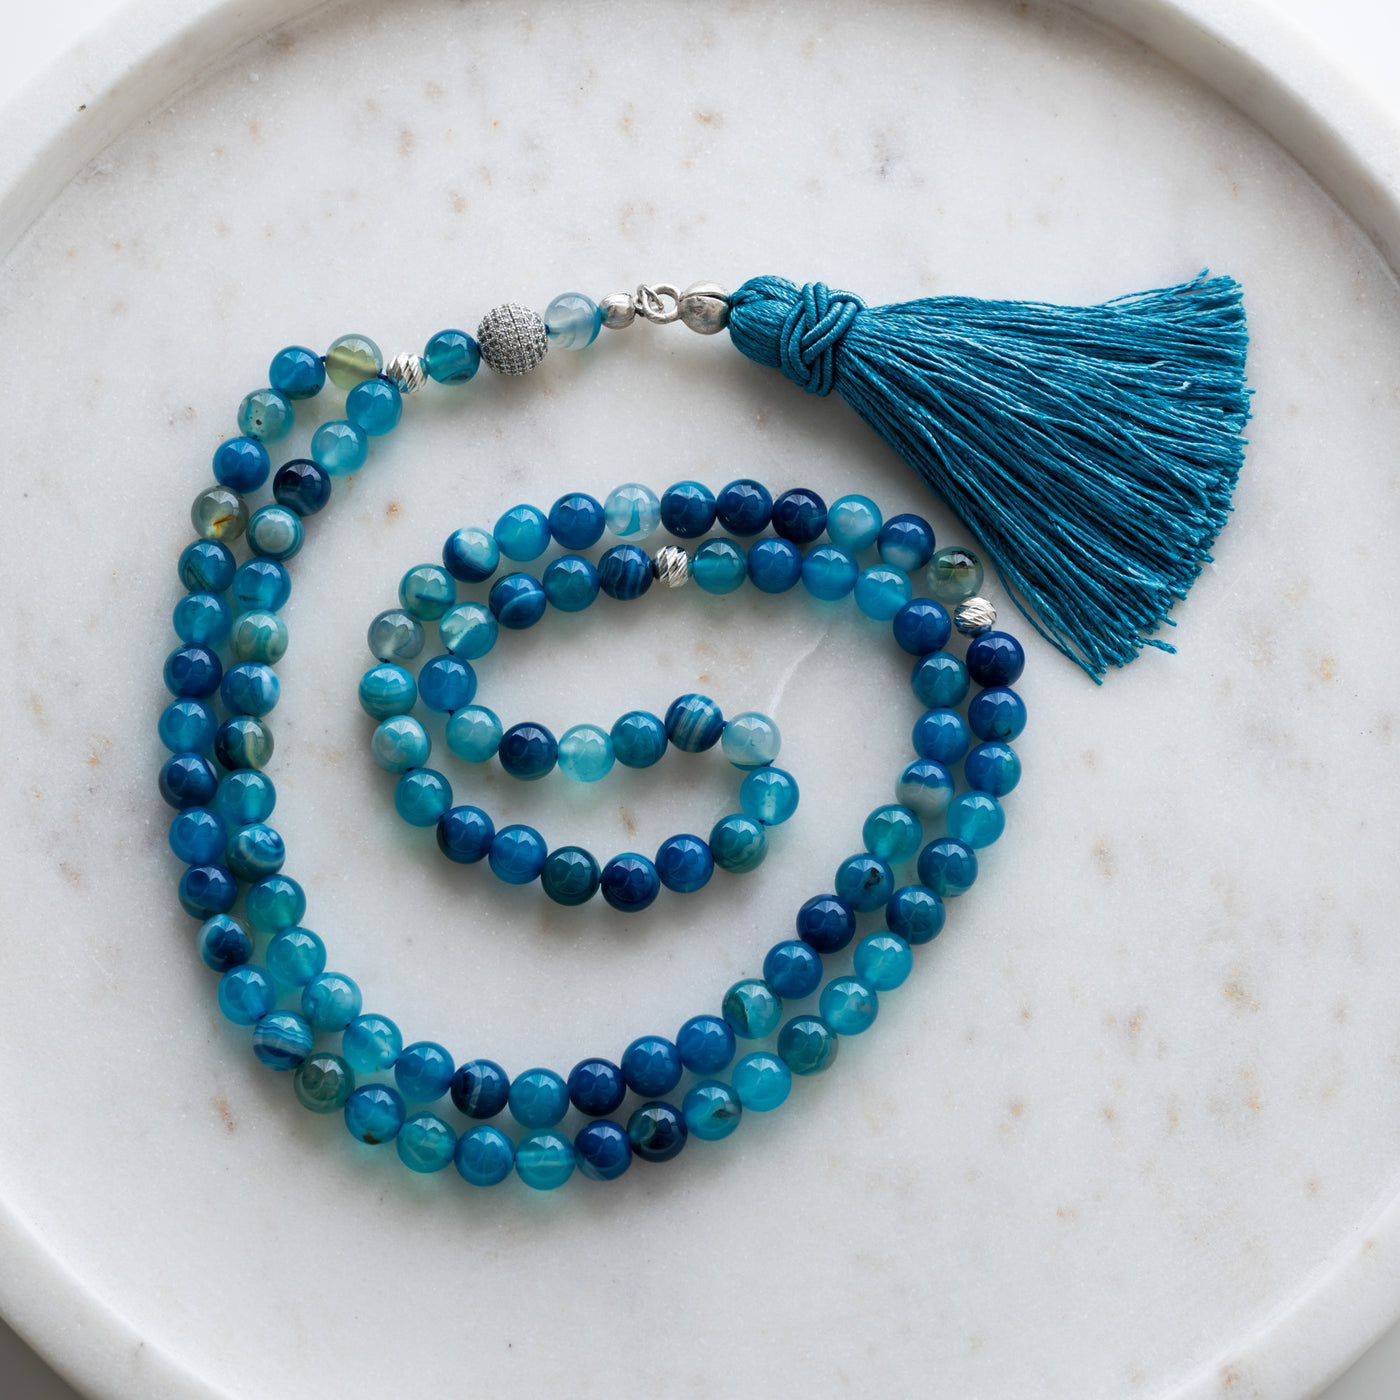 99 Prayer beads - Blue Agate Gemstone. With cubic zirconia and sterling silver separators. The Tasbih are handmade in Turkey with big attention to details and quality.